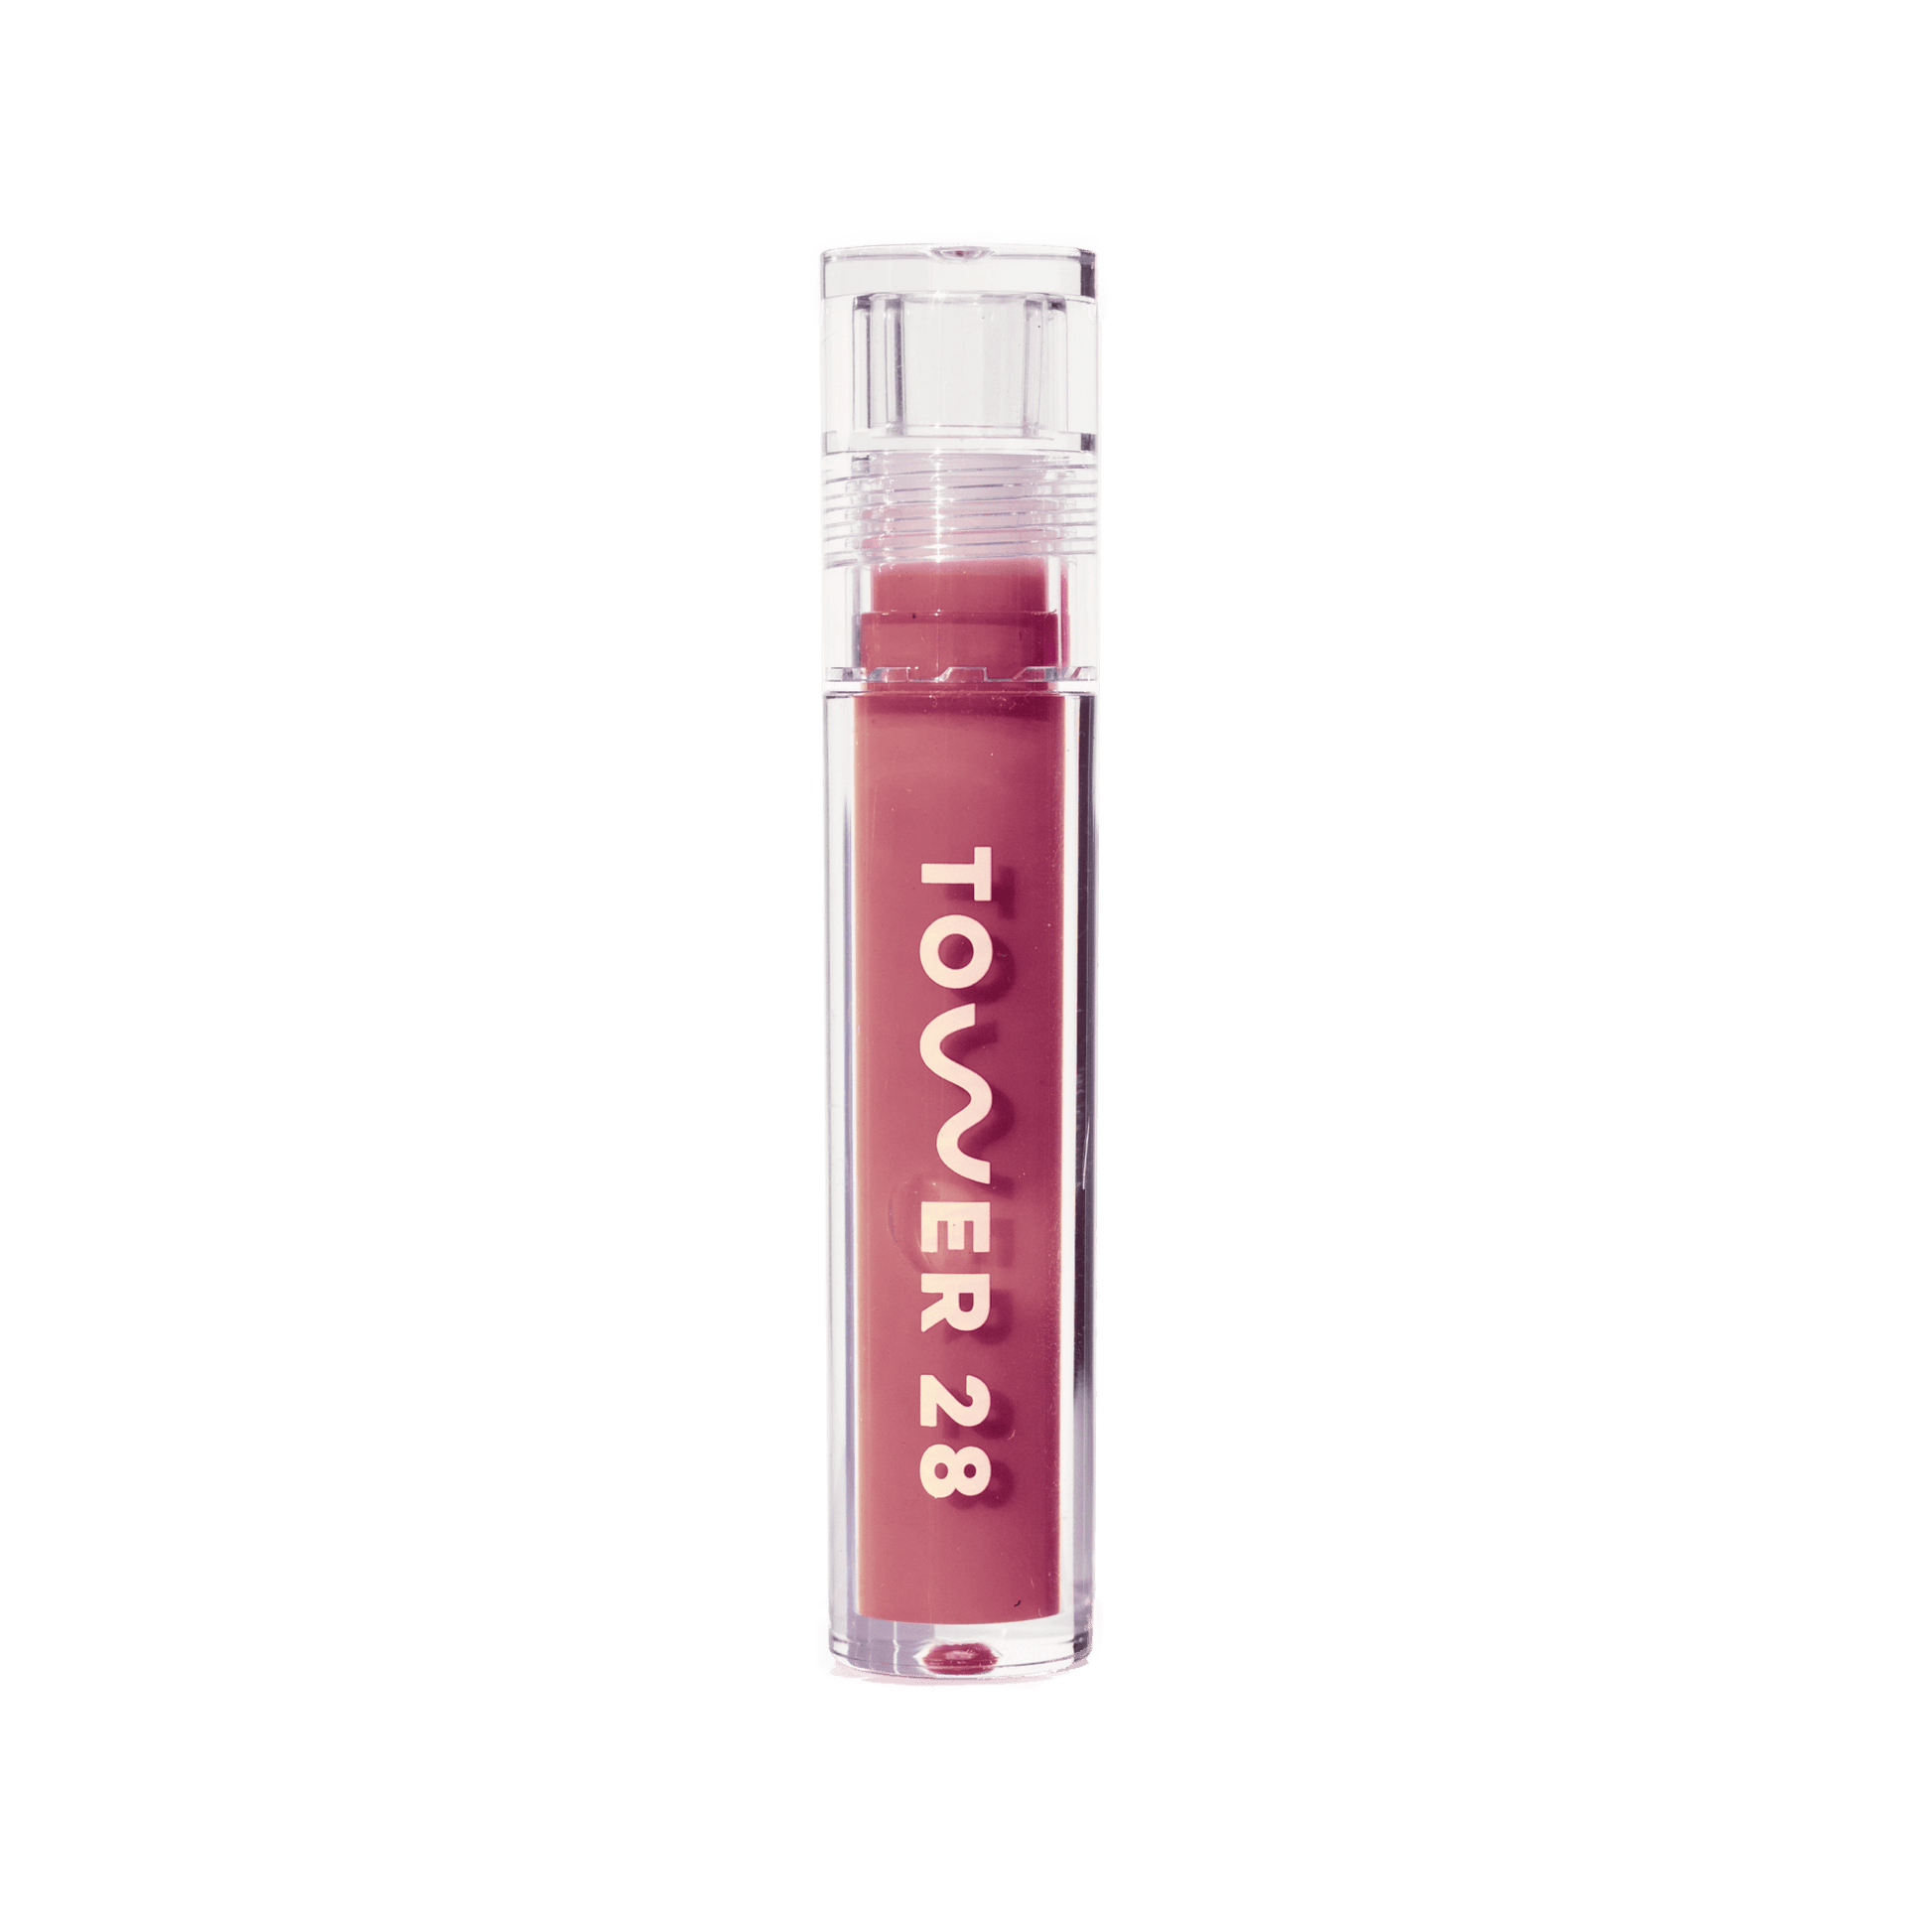 The Tower 28 Beauty ShineOn Lip Jelly in the shade Sesame